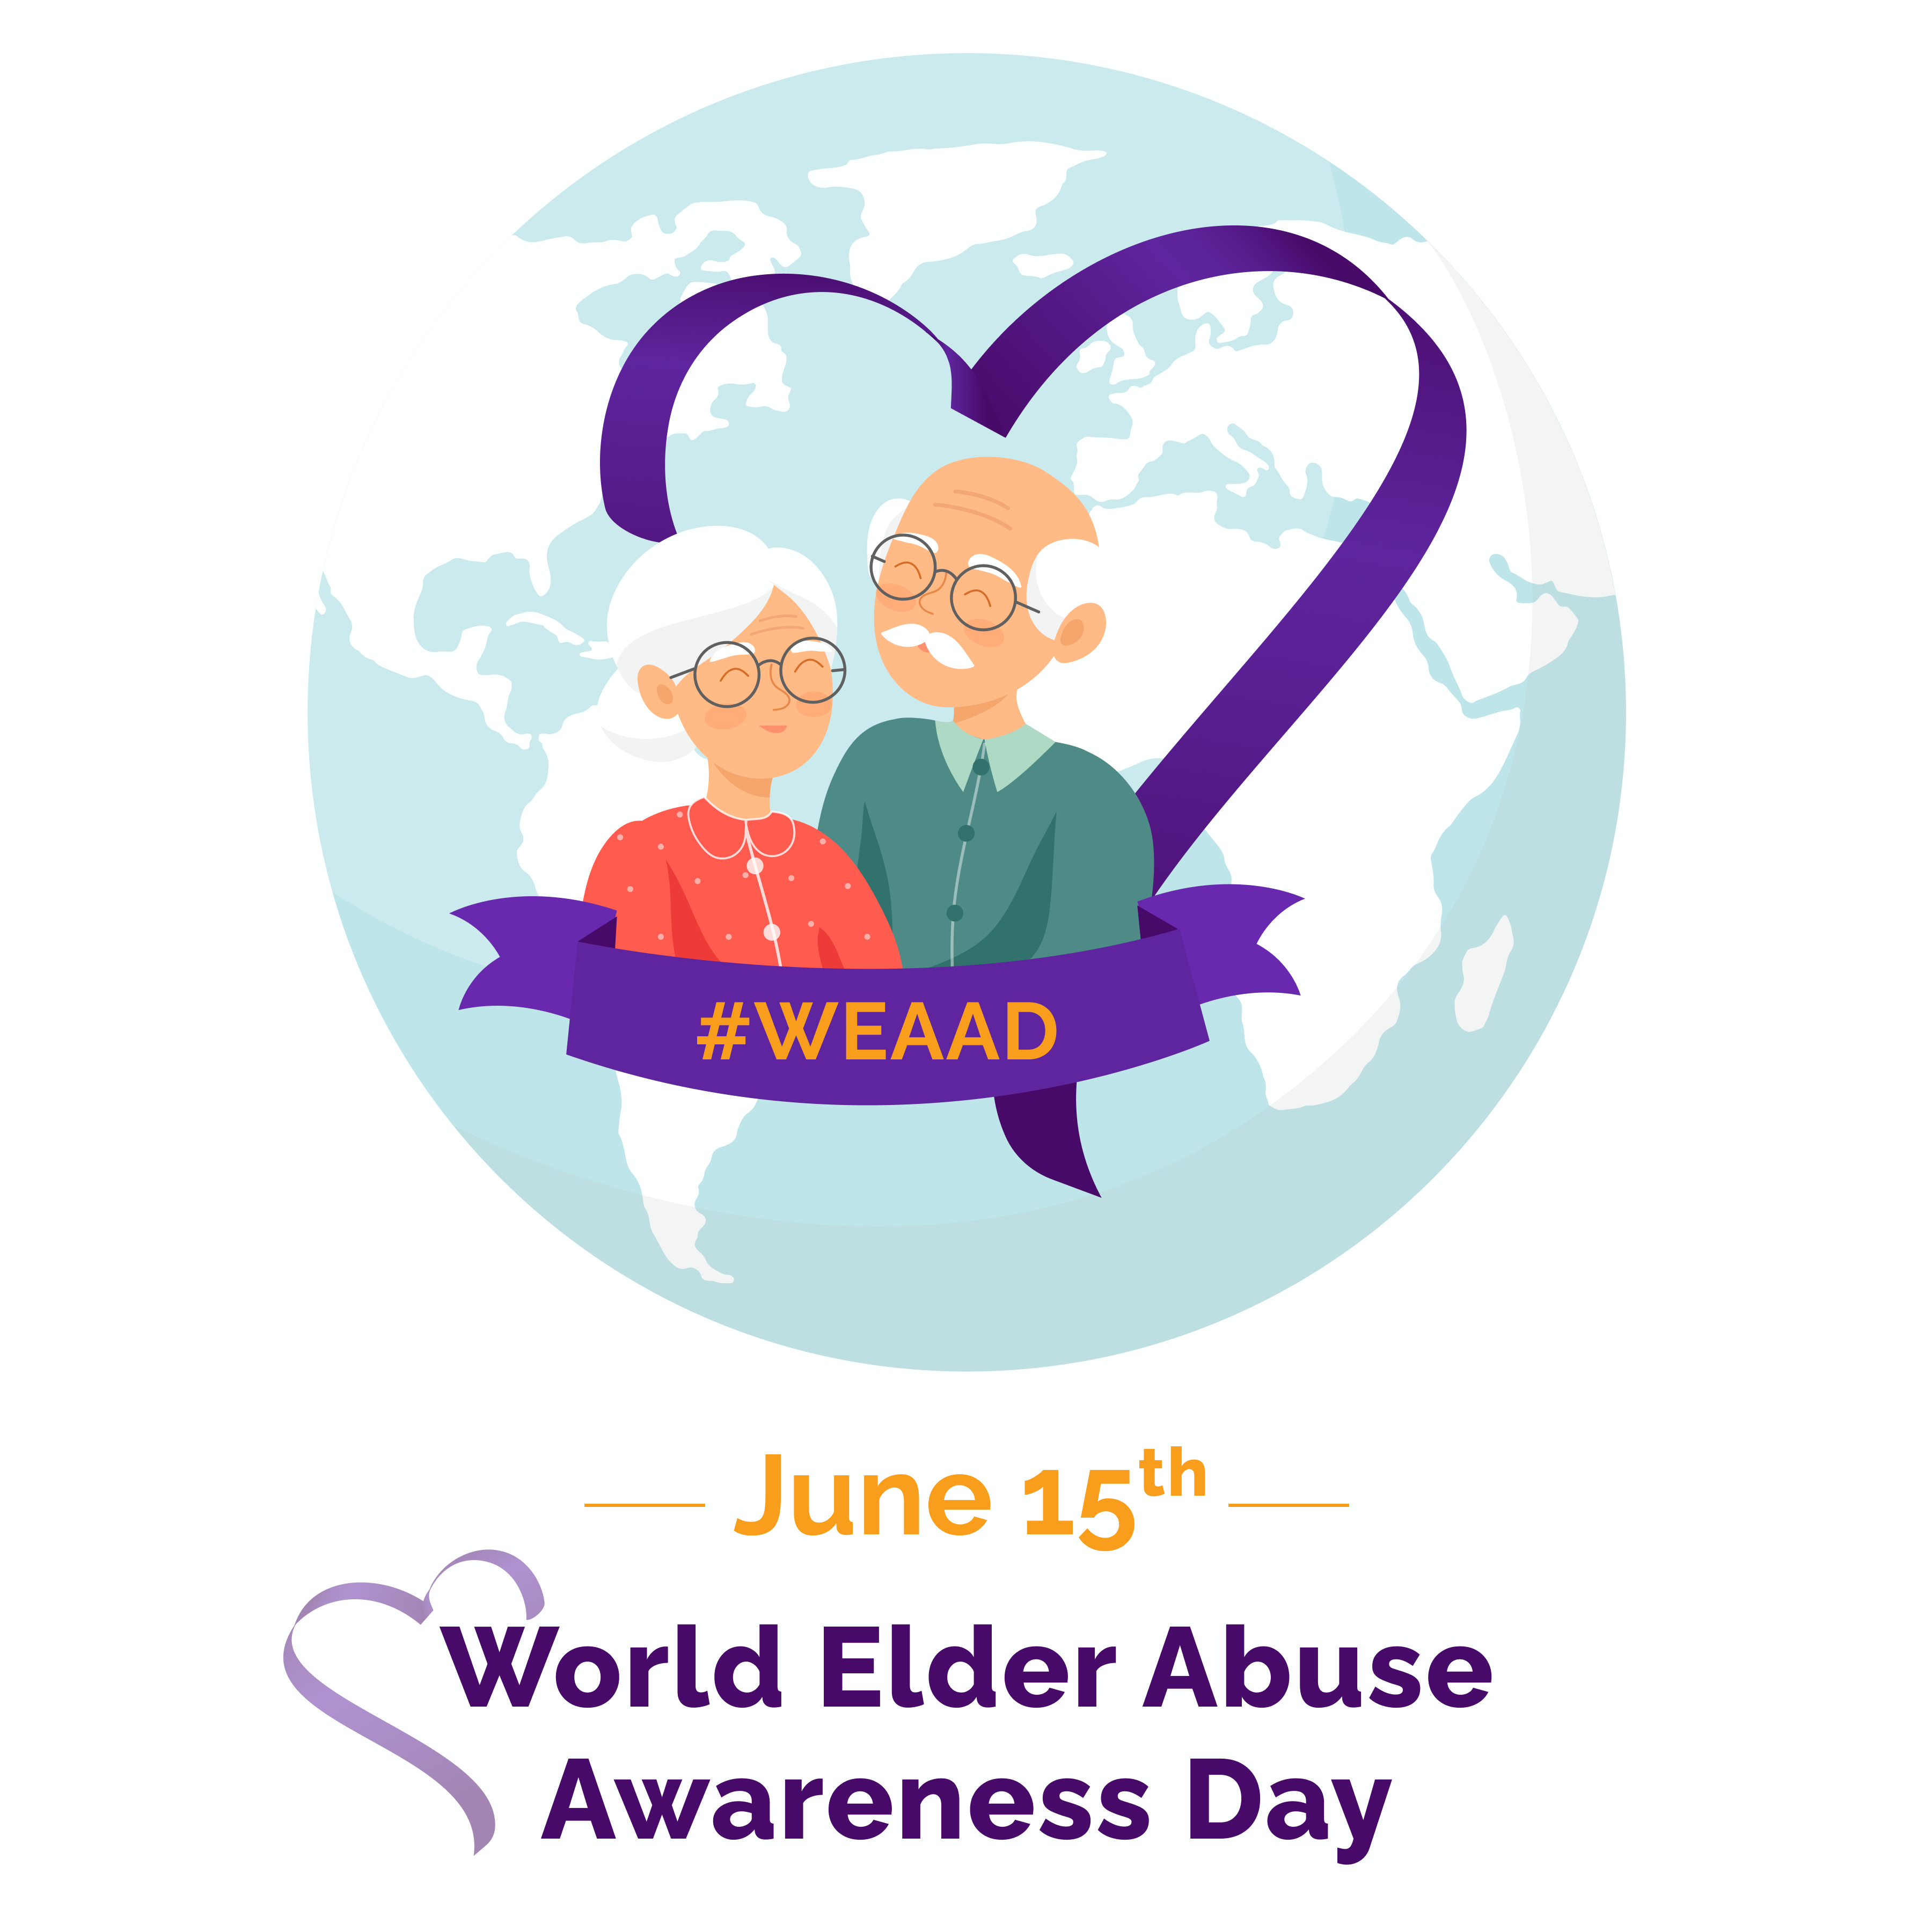 World Elder Abuse Awareness Day 2022: 6 Ways to Prevent, Recognize, and Address Elder Abuse